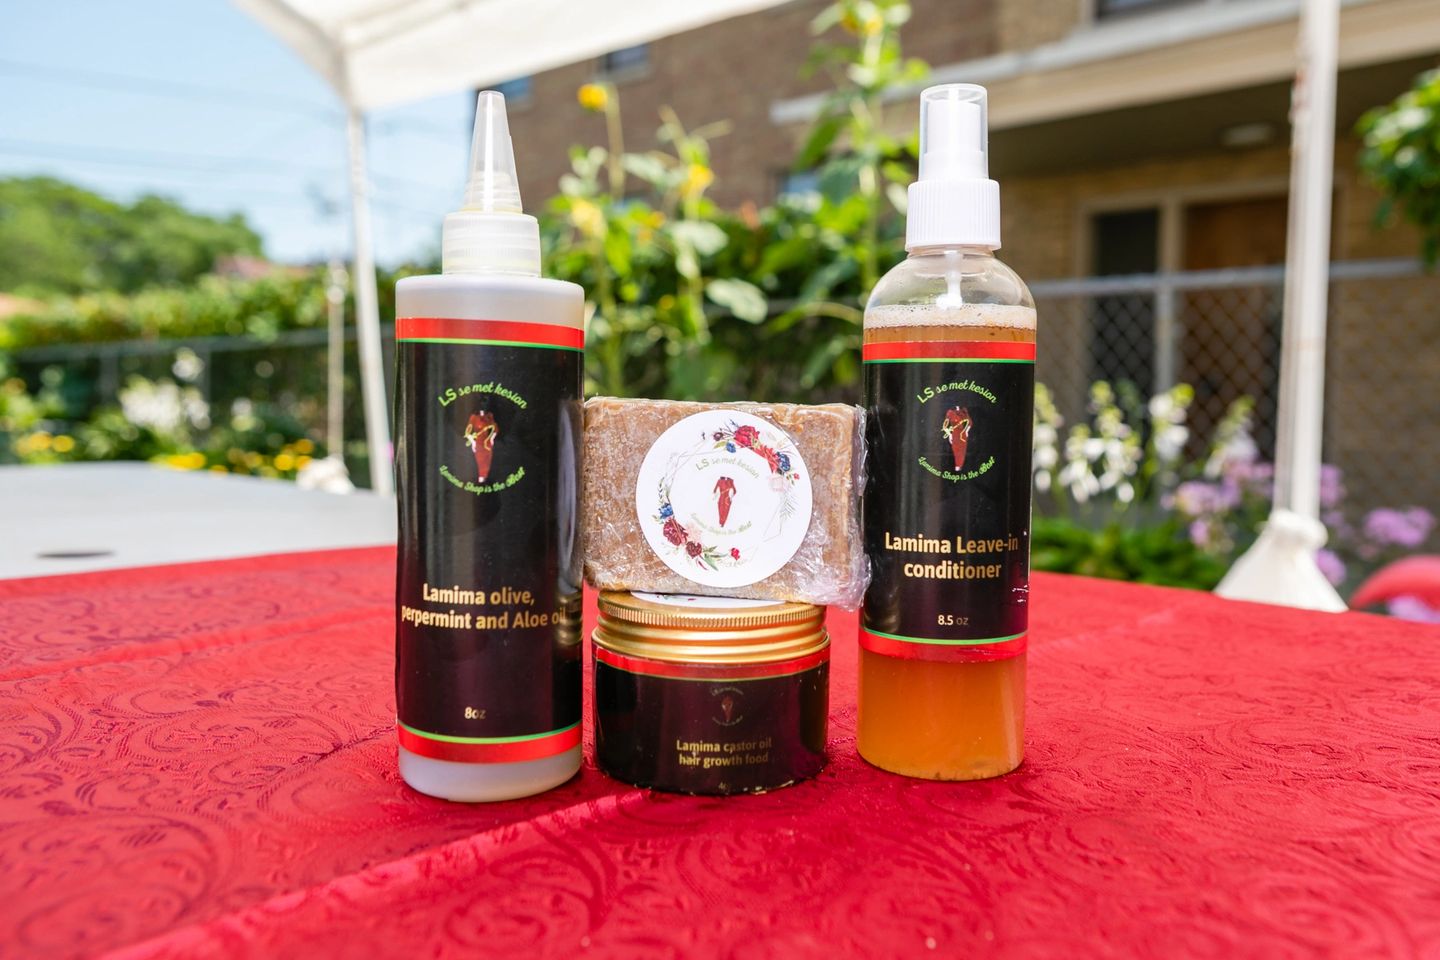 Organic Daily Hair Products-Natural/Bar Shampoo, Peppermint Oil, Pomade, Castor Oil & Leave-In Conditioner/Edge and Serum set Active